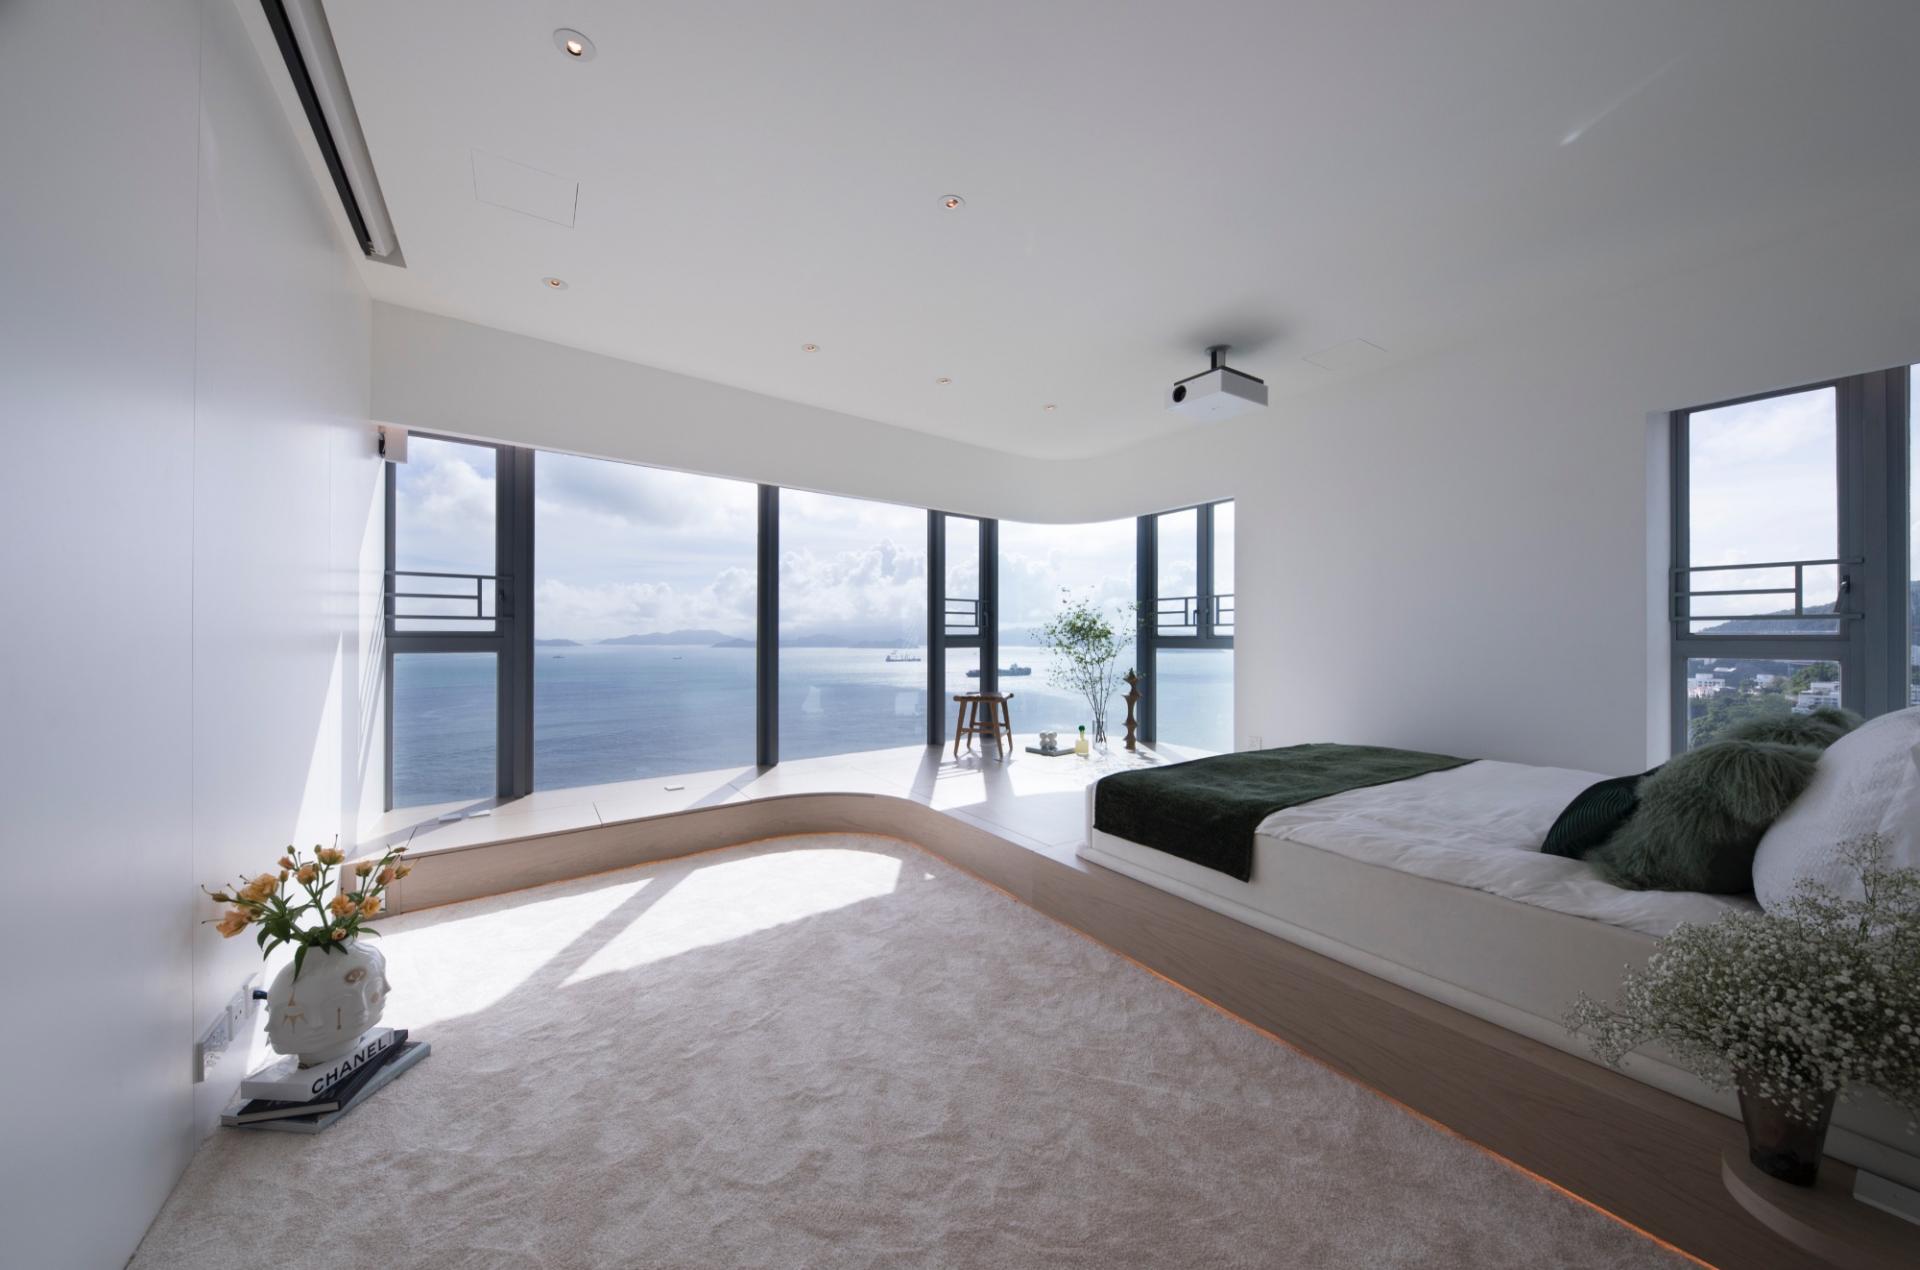  This 2,000 sq. ft. sea view flat links three generations of a family with curves